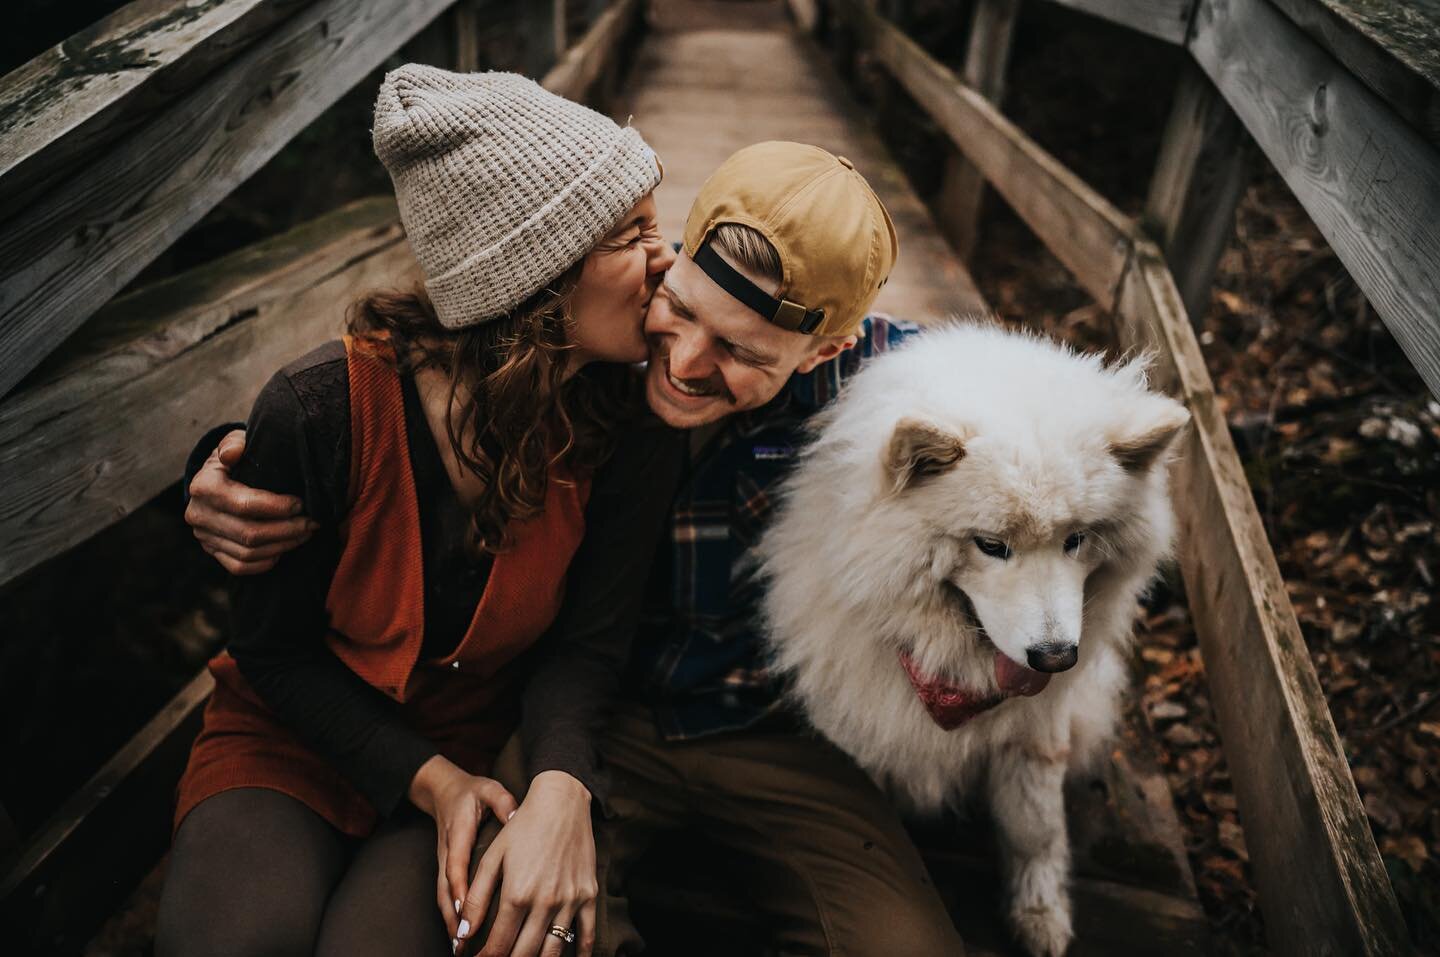 Finally getting some Minnesota love on my feed. Love these humans and their pup. Thank you for dancing in the woods with me.

#duluthphotographer #coloradophotographer #coloradospringsphotographer #minnesotacouplesphotographer #northshore #northshore